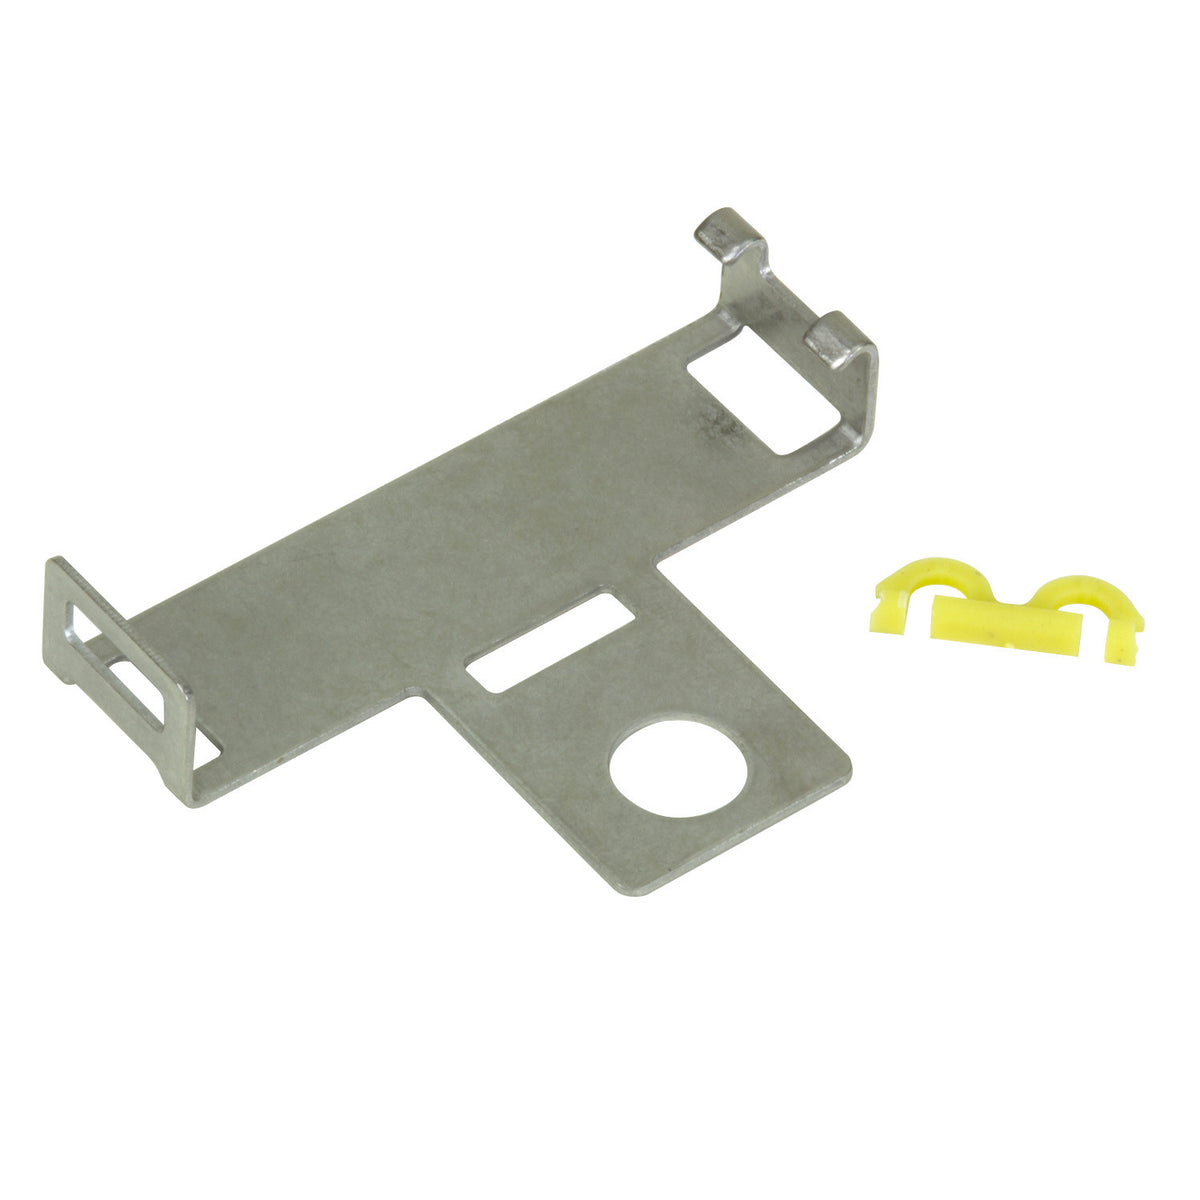 TPMS Metal Cradle with Clip (17-21101)